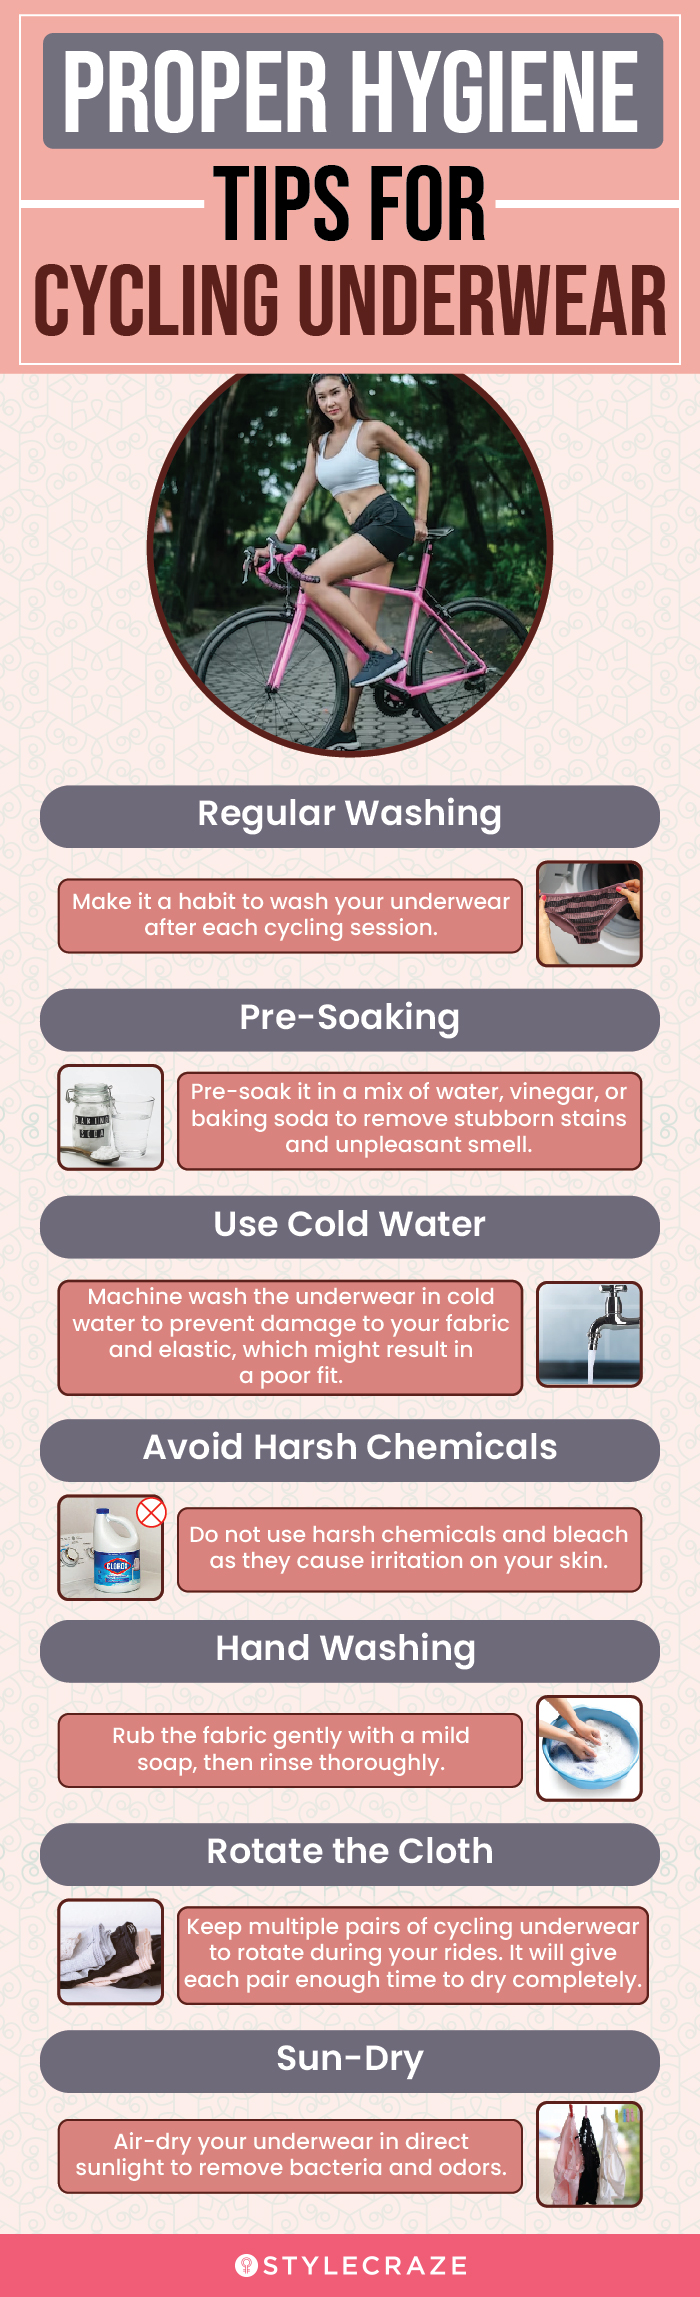 Proper Hygiene Tips For Cycling Underwear (infographic)